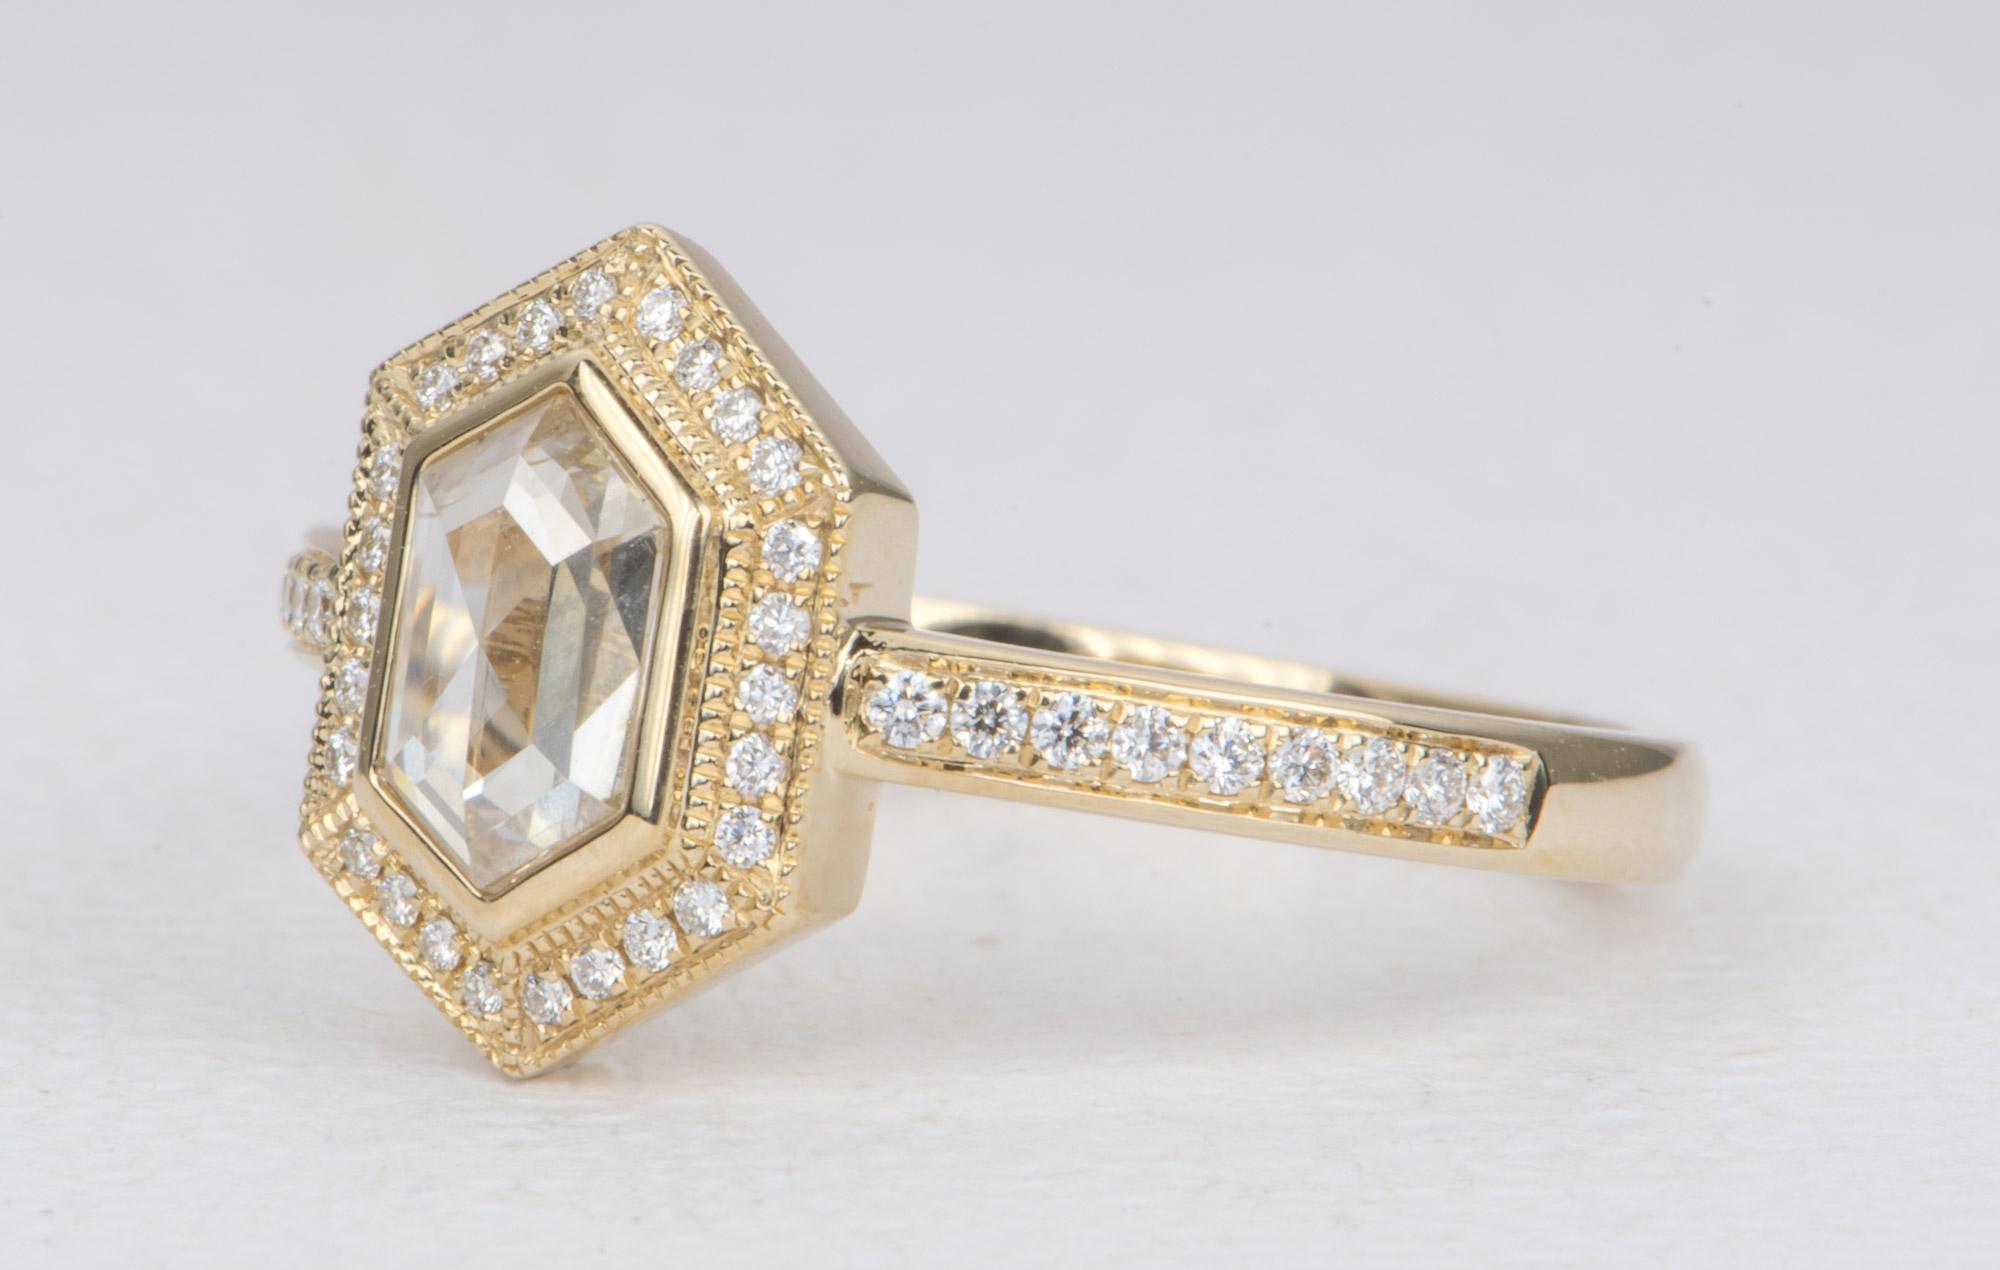 ♥  Solid 14K gold ring set with a hexagon-shaped diamond in the center in a bezel set style, then surrounded by a halo of brilliant colorless diamonds with delicate milgrain details.
♥  The diamond is very clear and almost eye-clean. It has a faint